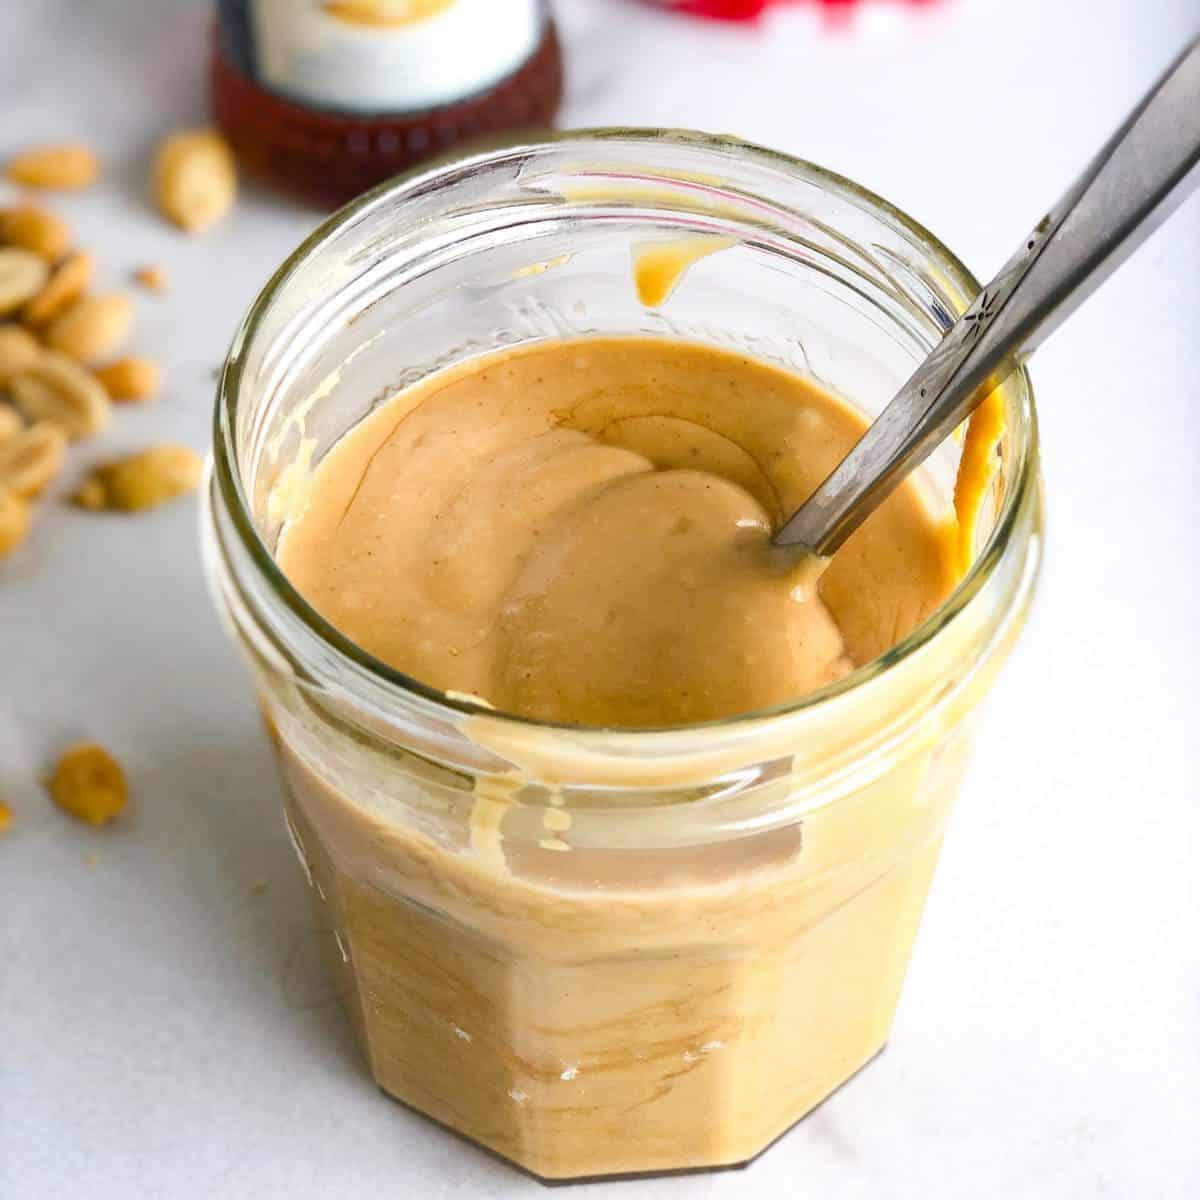 How to Make One Cup of Homemade Peanut Butter